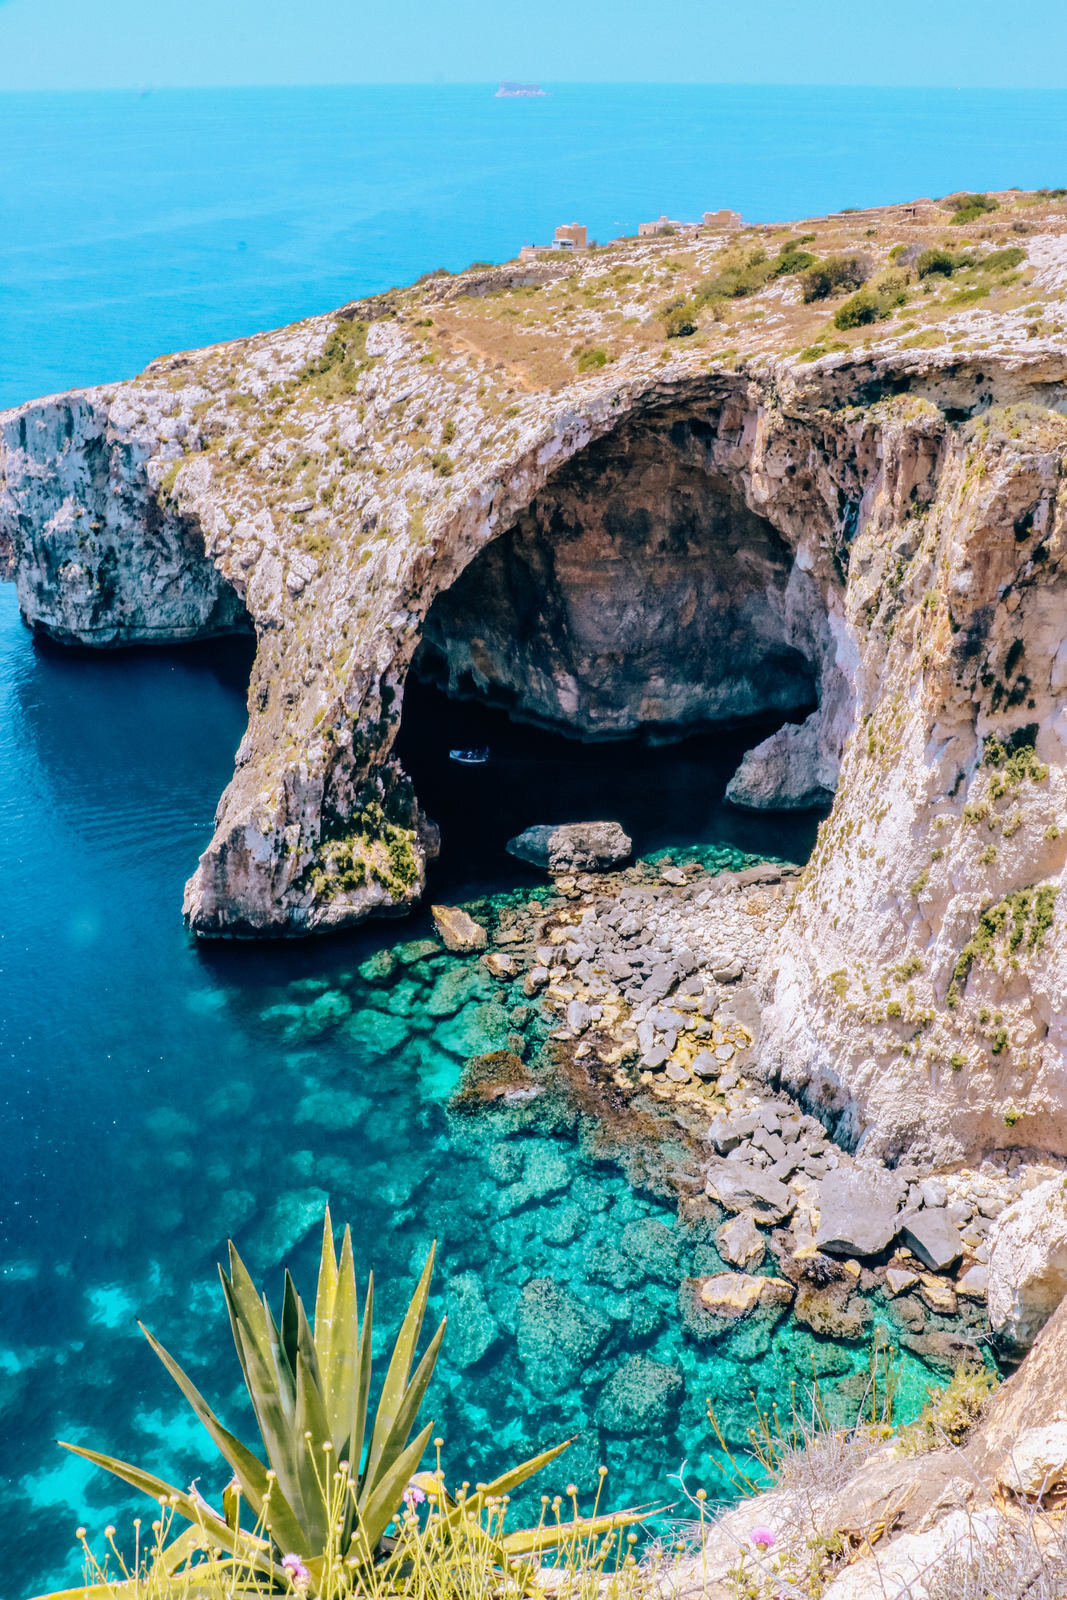 The Blue Grotto viewpoint